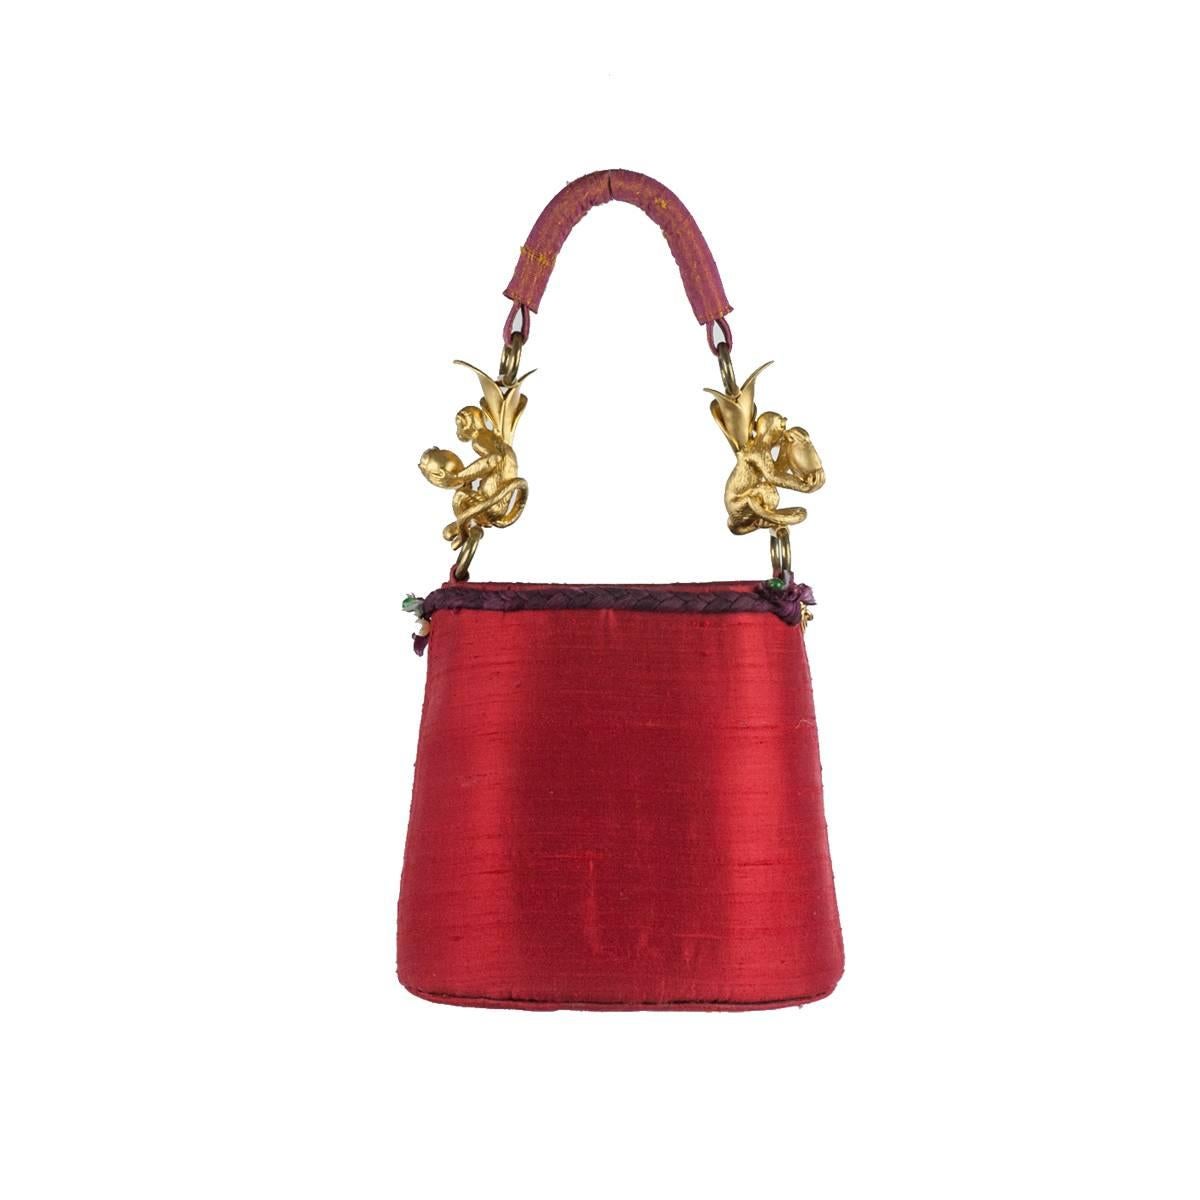 Very original and beautiful bag by Roberta Balsamo Milan
Roberta Balsamo, the queen of etno-chic
Red shantung silk
Unique handle
Little corals and golden inserts
Golden monkeys with crystals
Made in Italy
Worldwide express shipping included